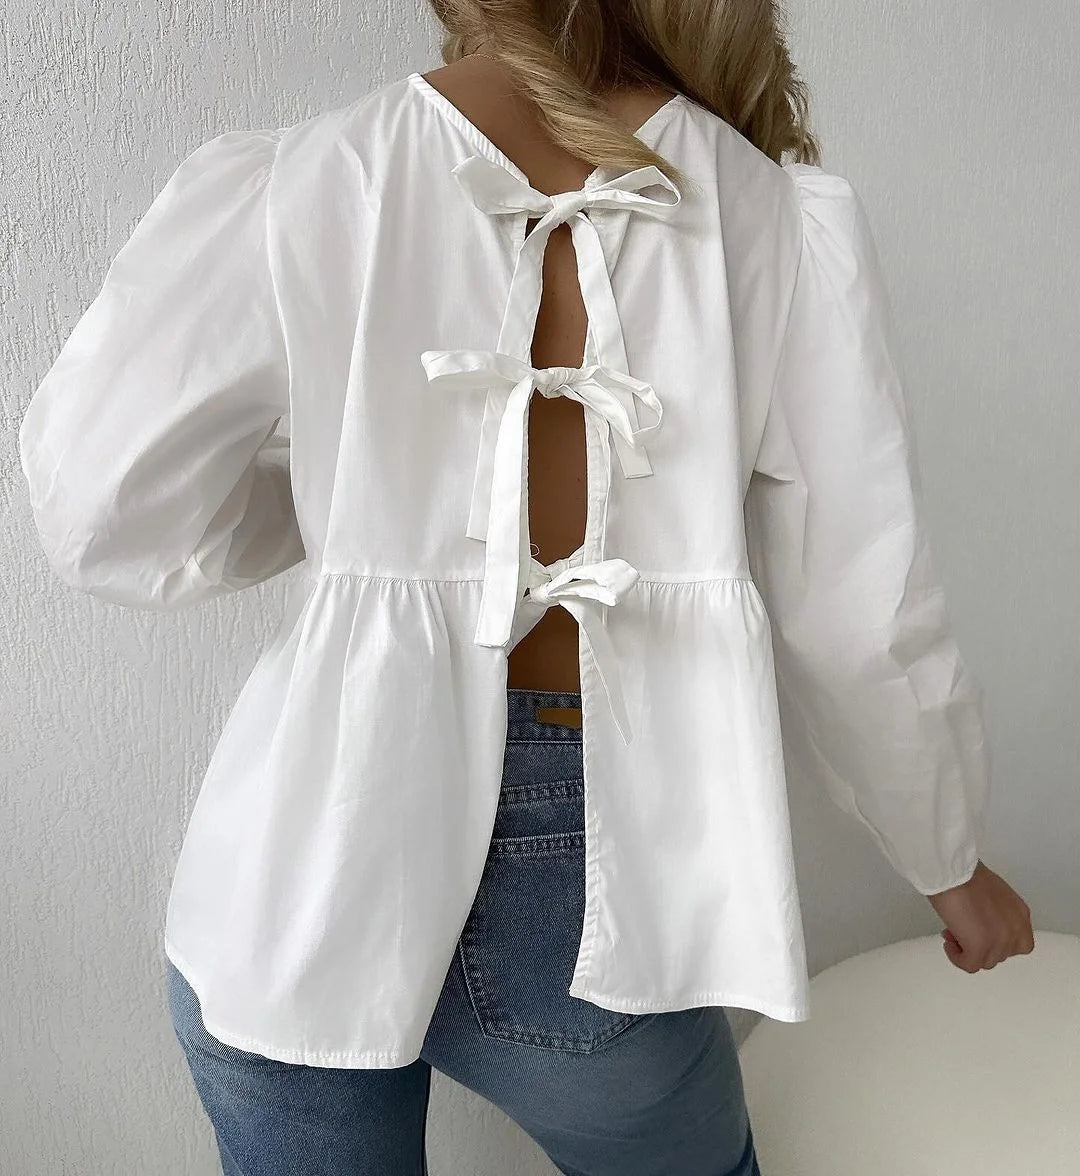 Puff Long Sleeves with Ties Blouse Shirt